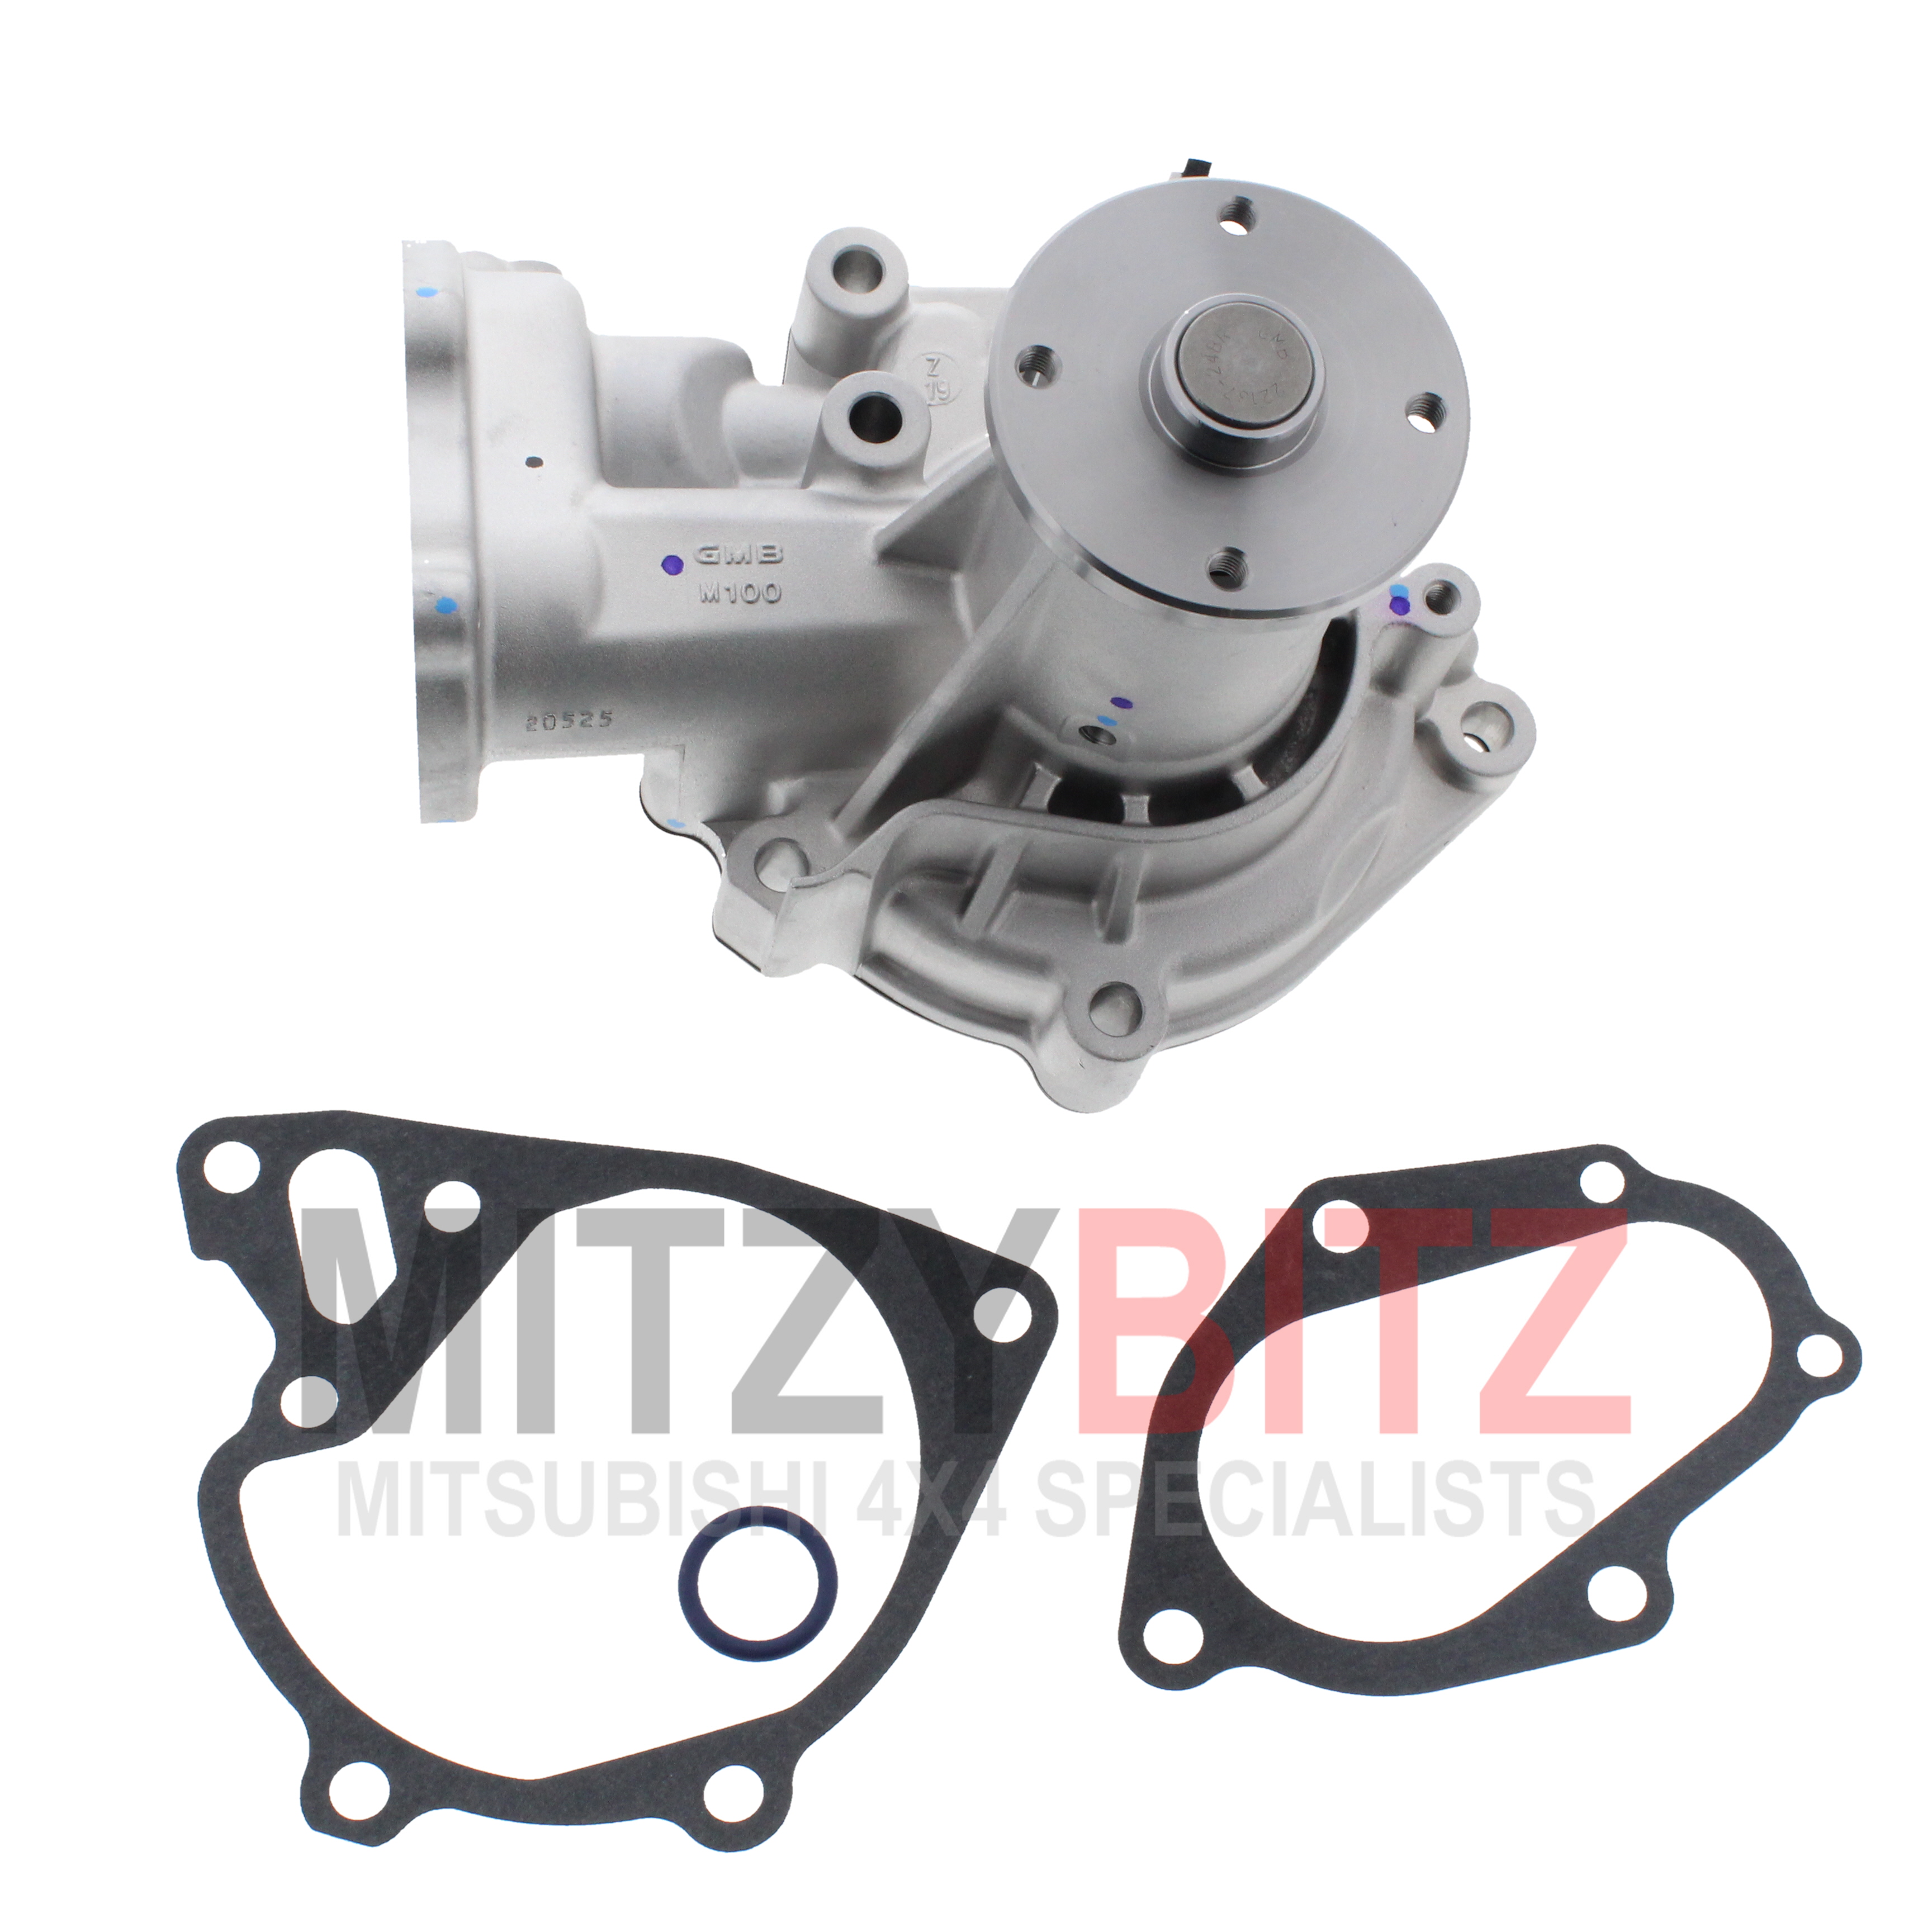 WATER PUMP AND GASKETS MITSUBISHI L200 KL3T Series 5 2.5D